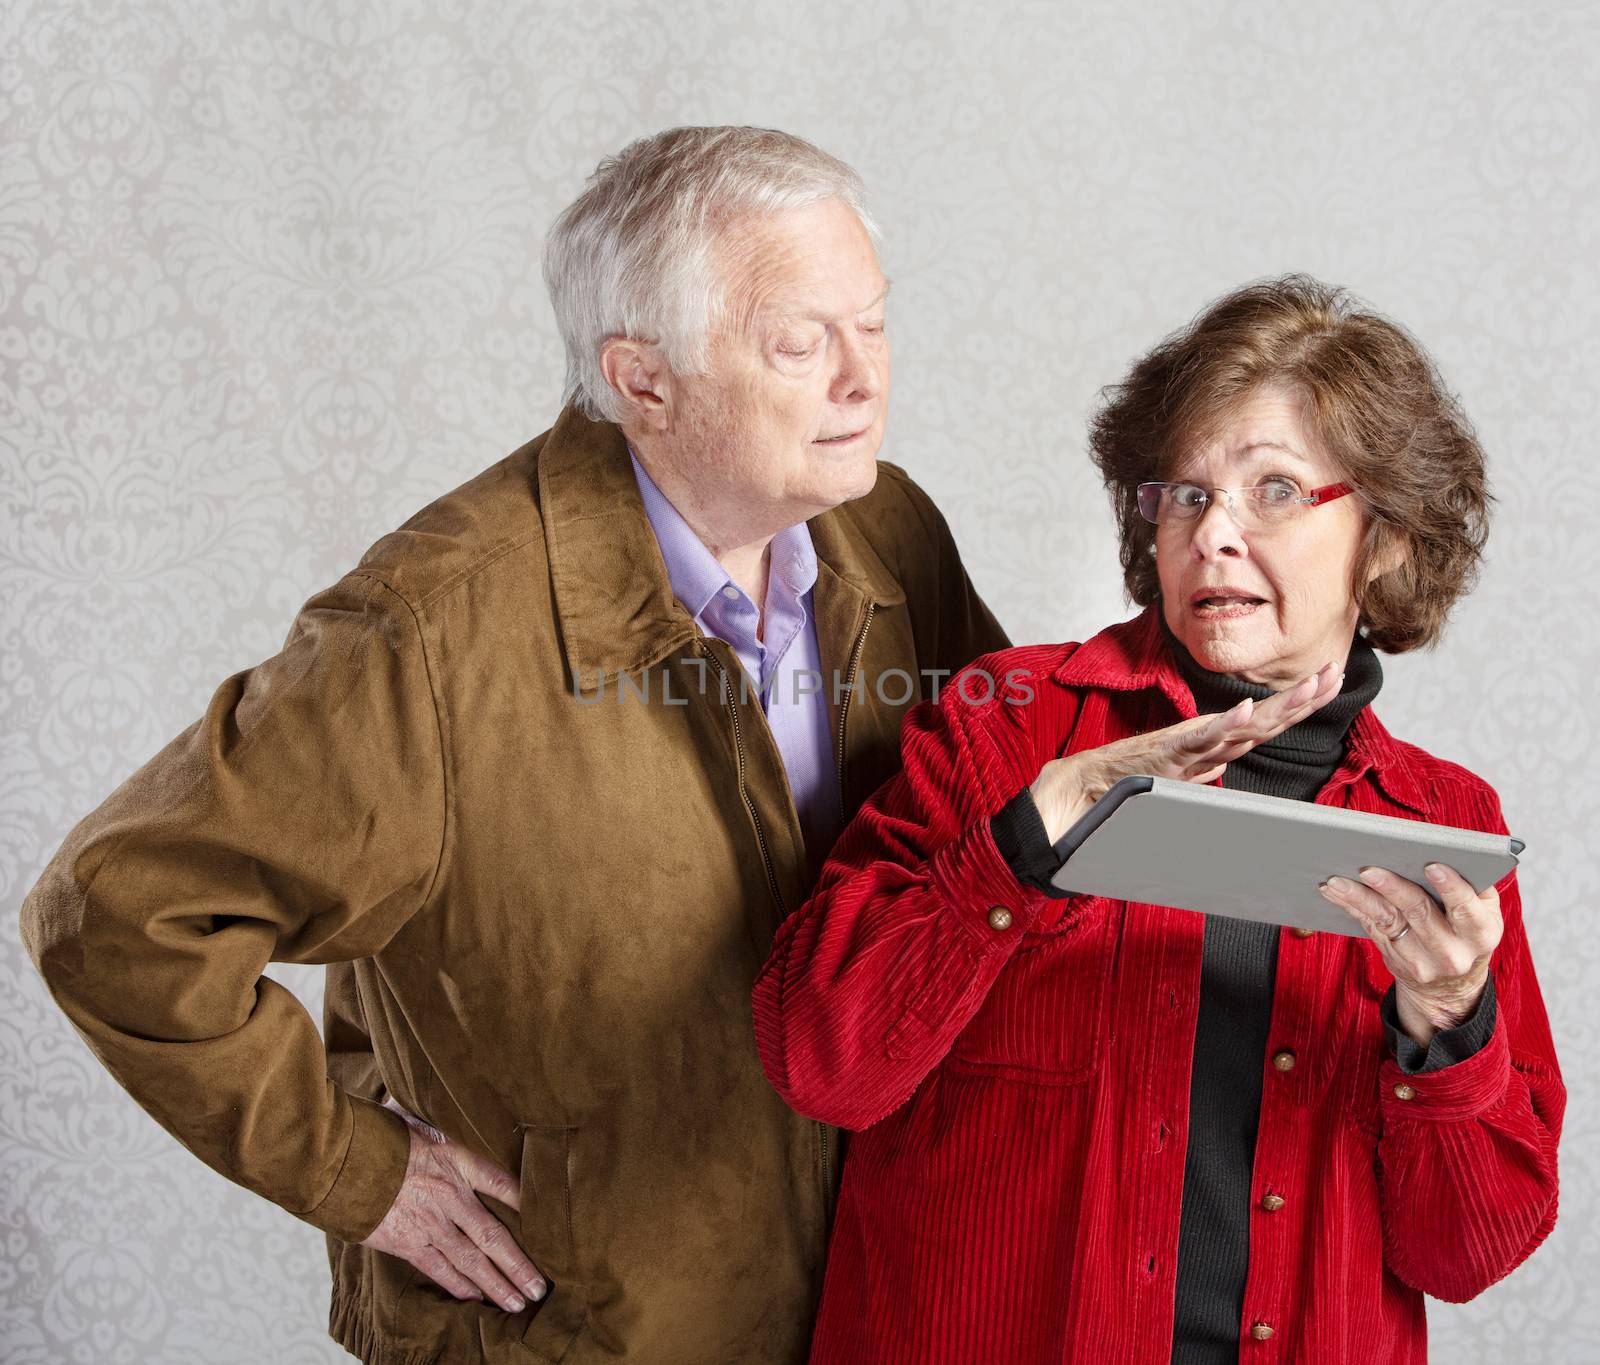 Suspicious man looking over shoulder of woman with tablet